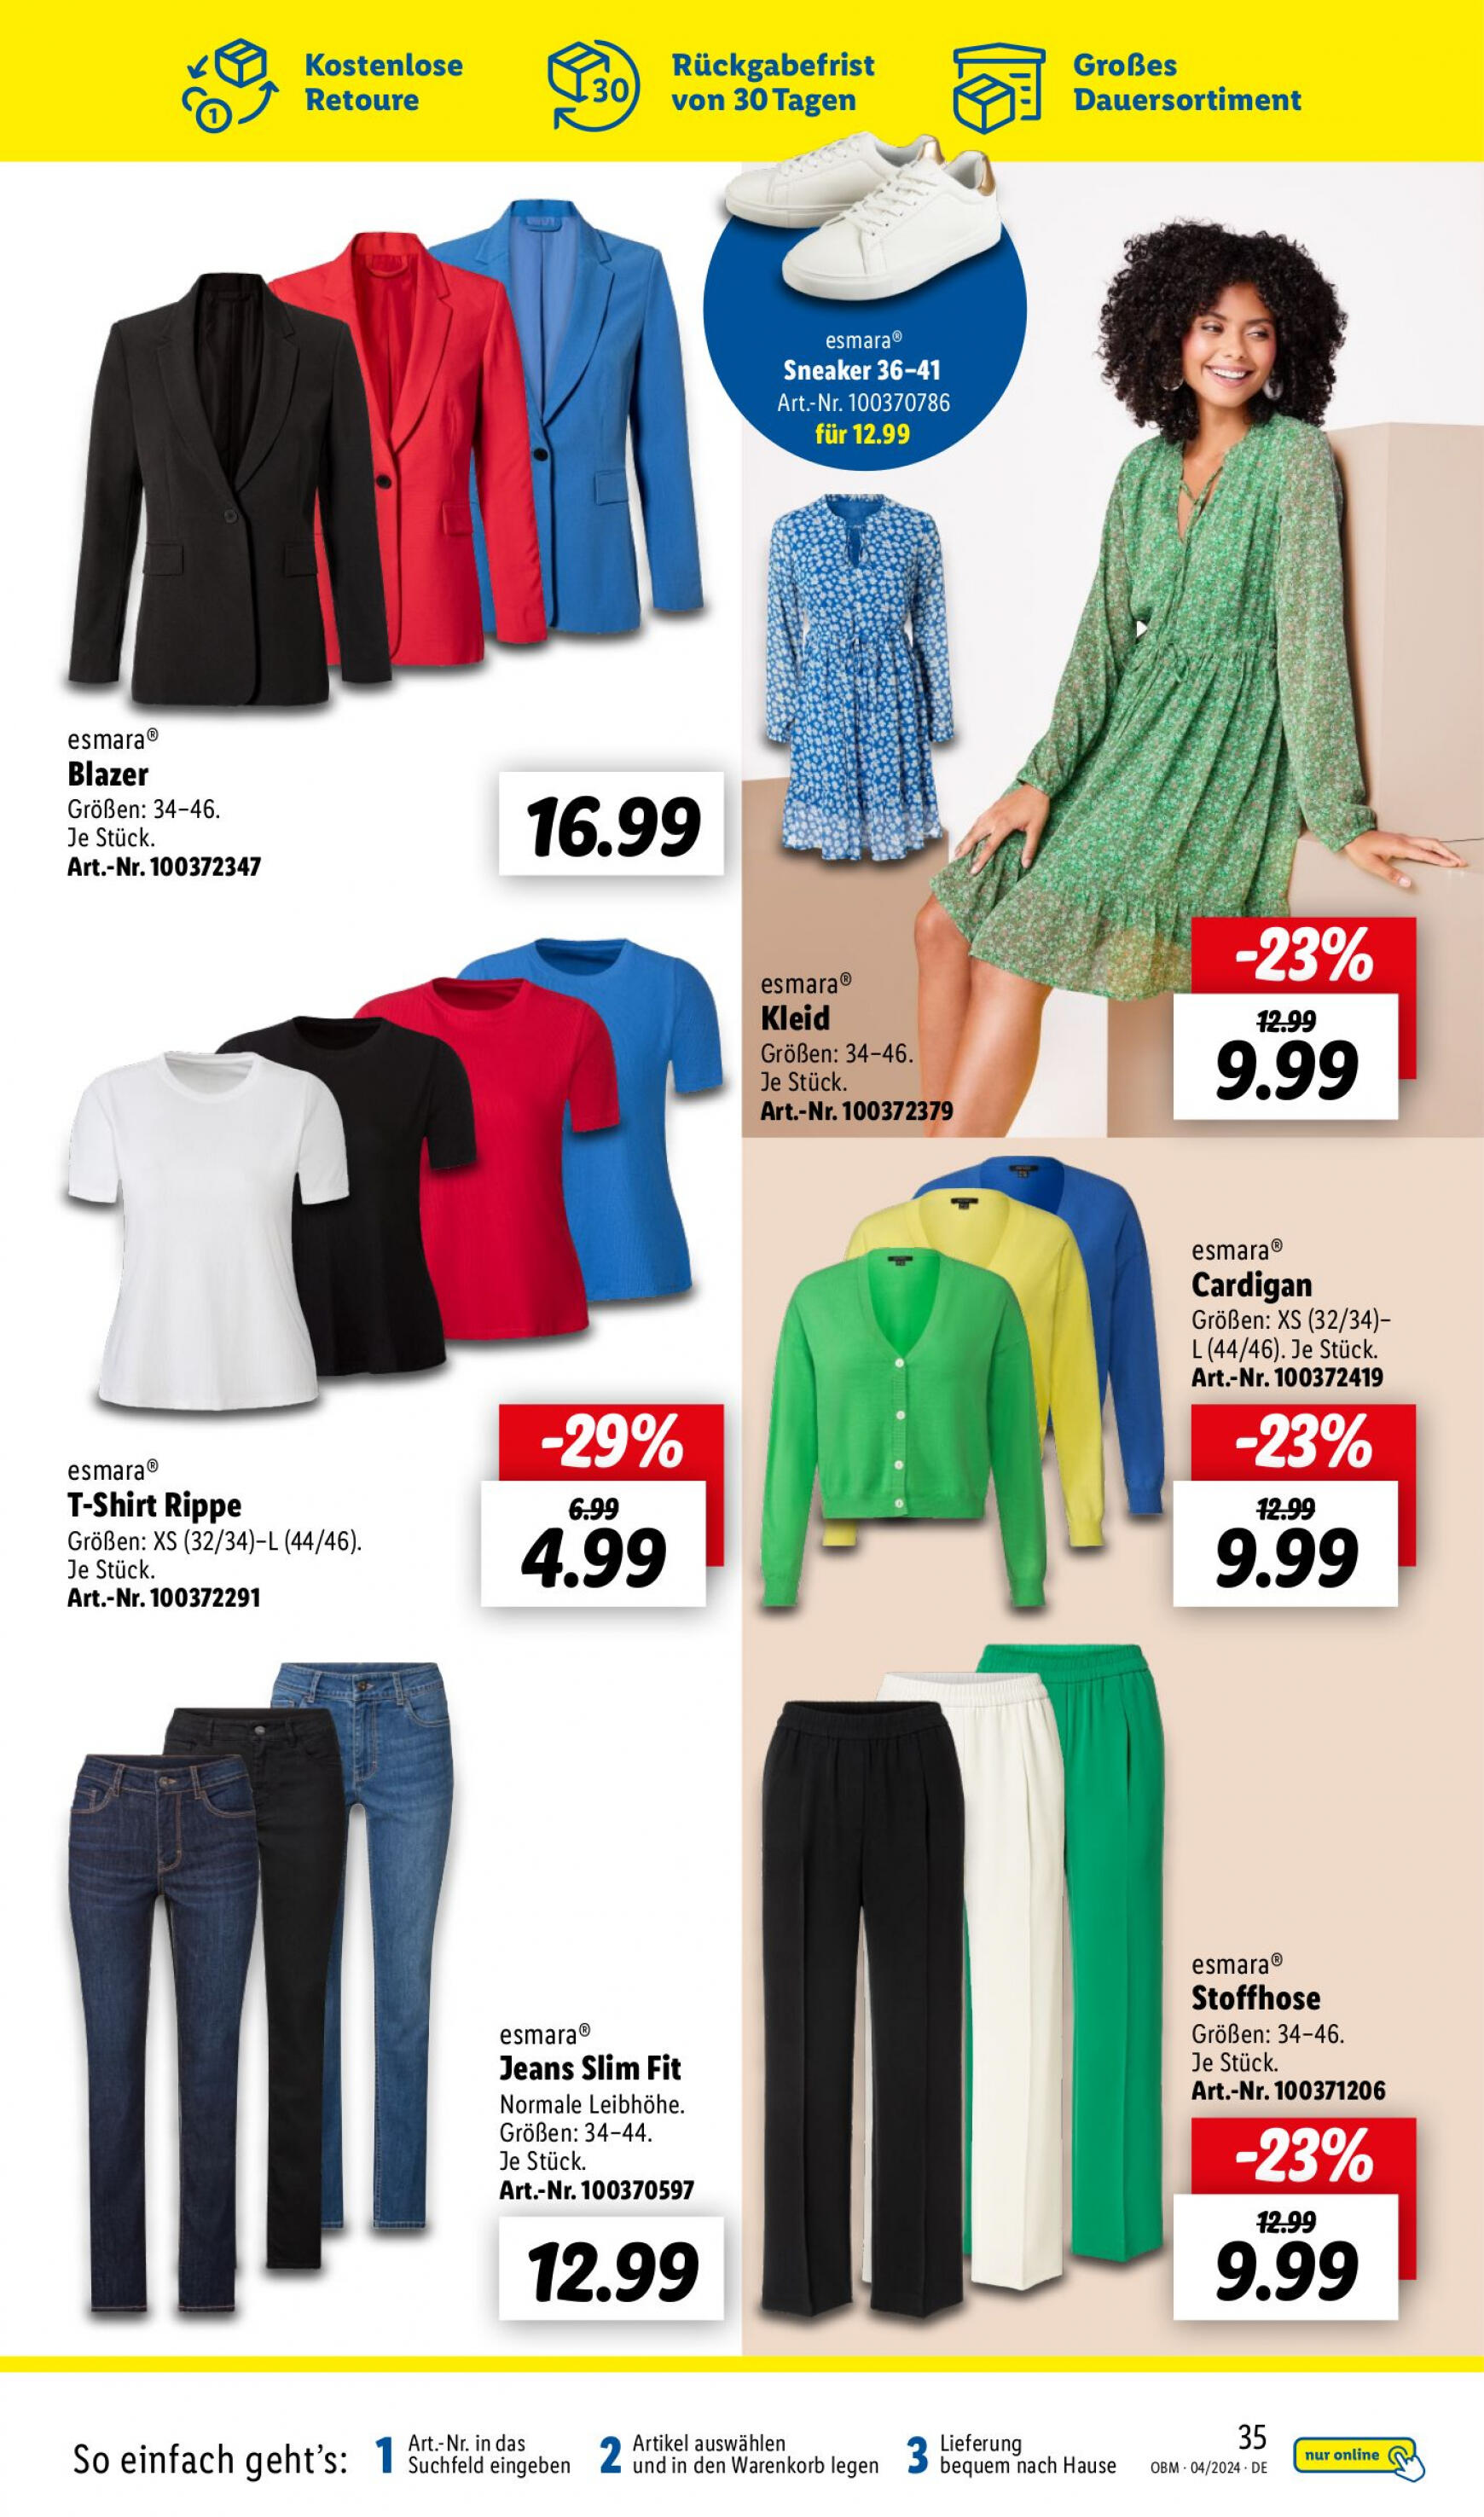 lidl - Flyer Lidl - Aktuelle Onlineshop-Highlights aktuell 01.04. - 30.04. - page: 35